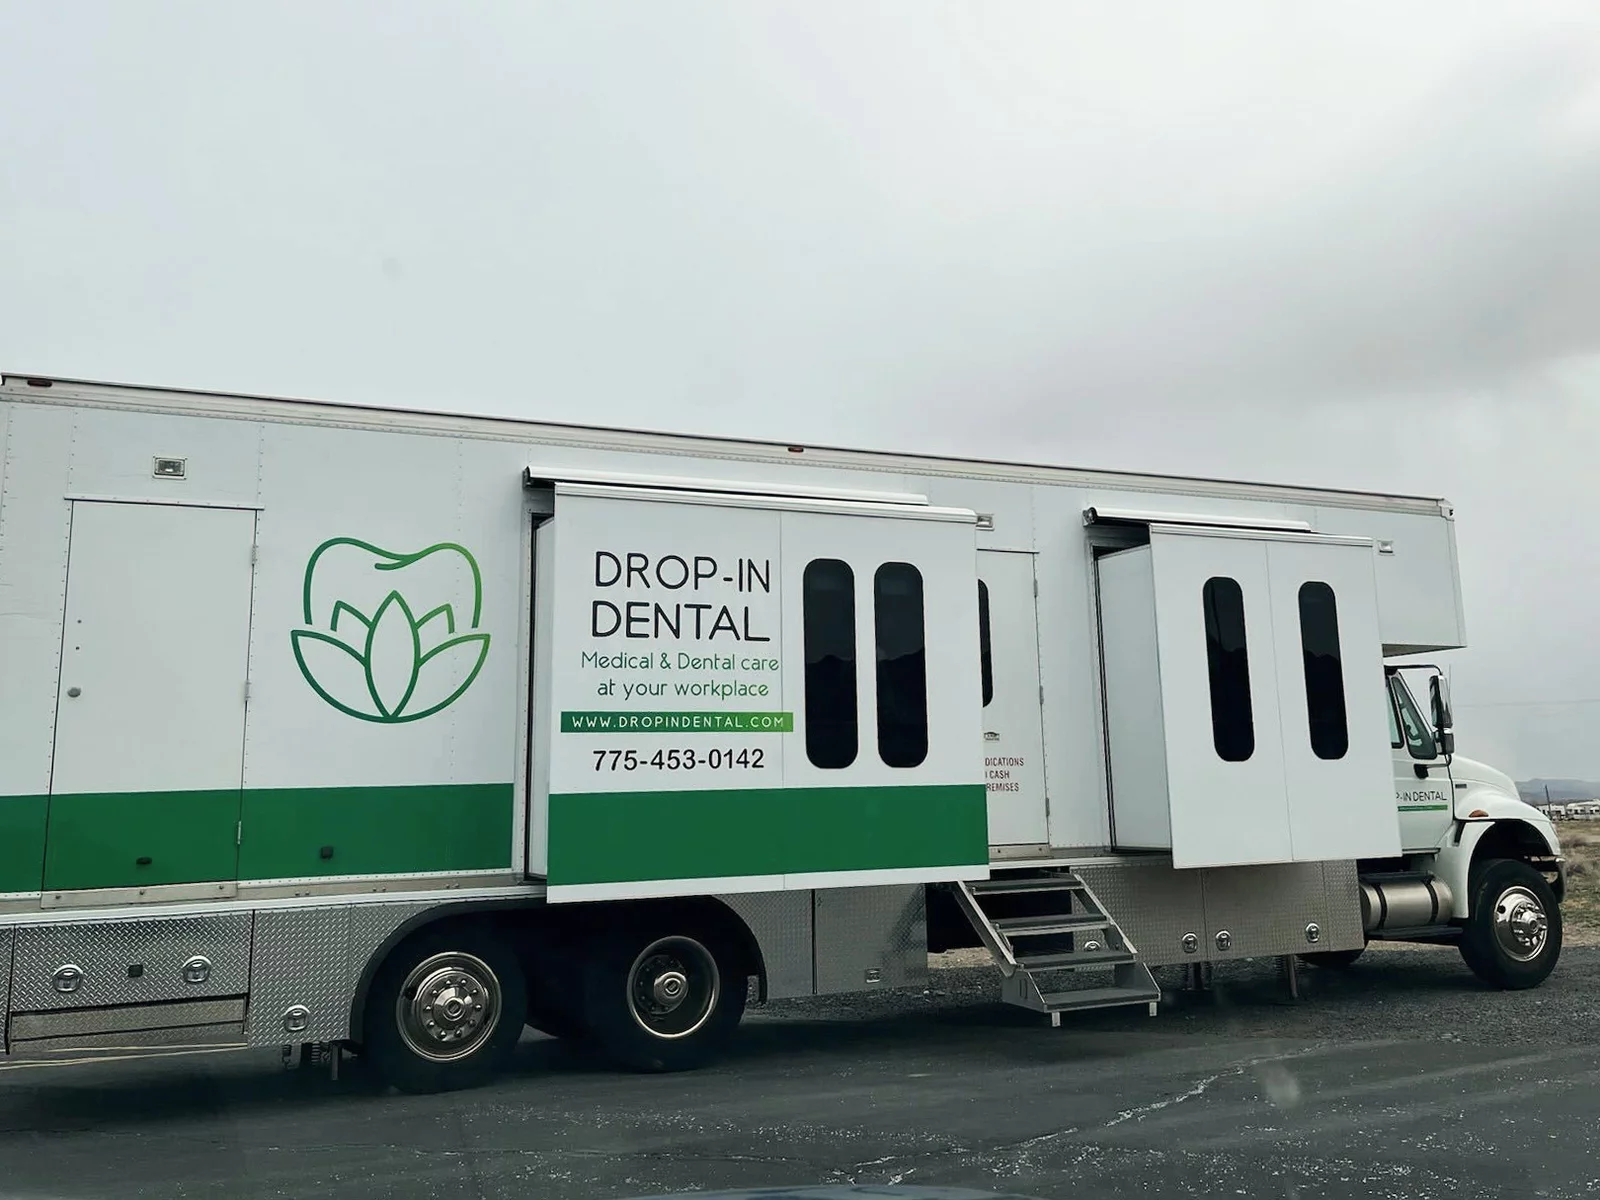 Clinics on wheels bring doctors and dentists to health care deserts